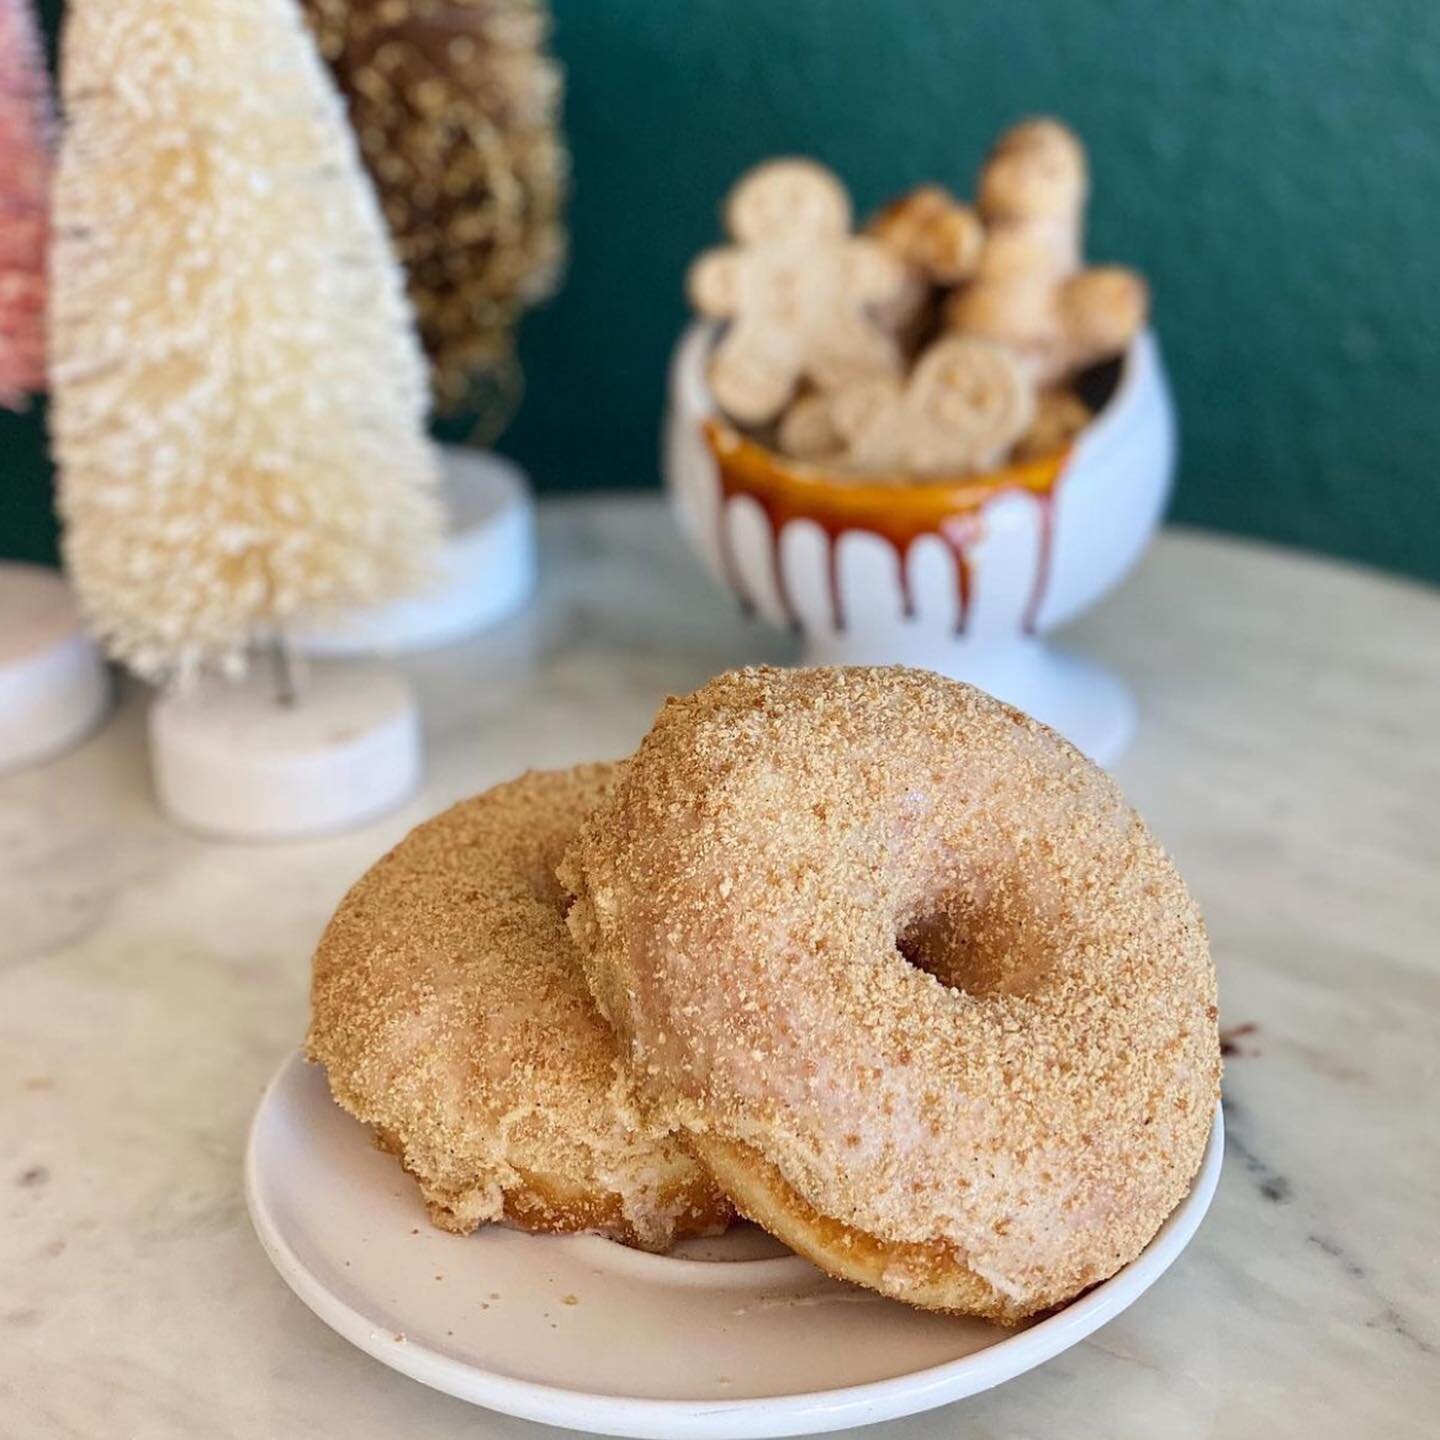 @bristoldoughnutco is giving 10% of all sales to the Christmas Drive this year! Now through Dec 18th!

🍩Some if the BEST donuts in Albuquerque, and absolutely amazing people. 

We are so thankful to you and your team. Let&rsquo;s believe for an incr